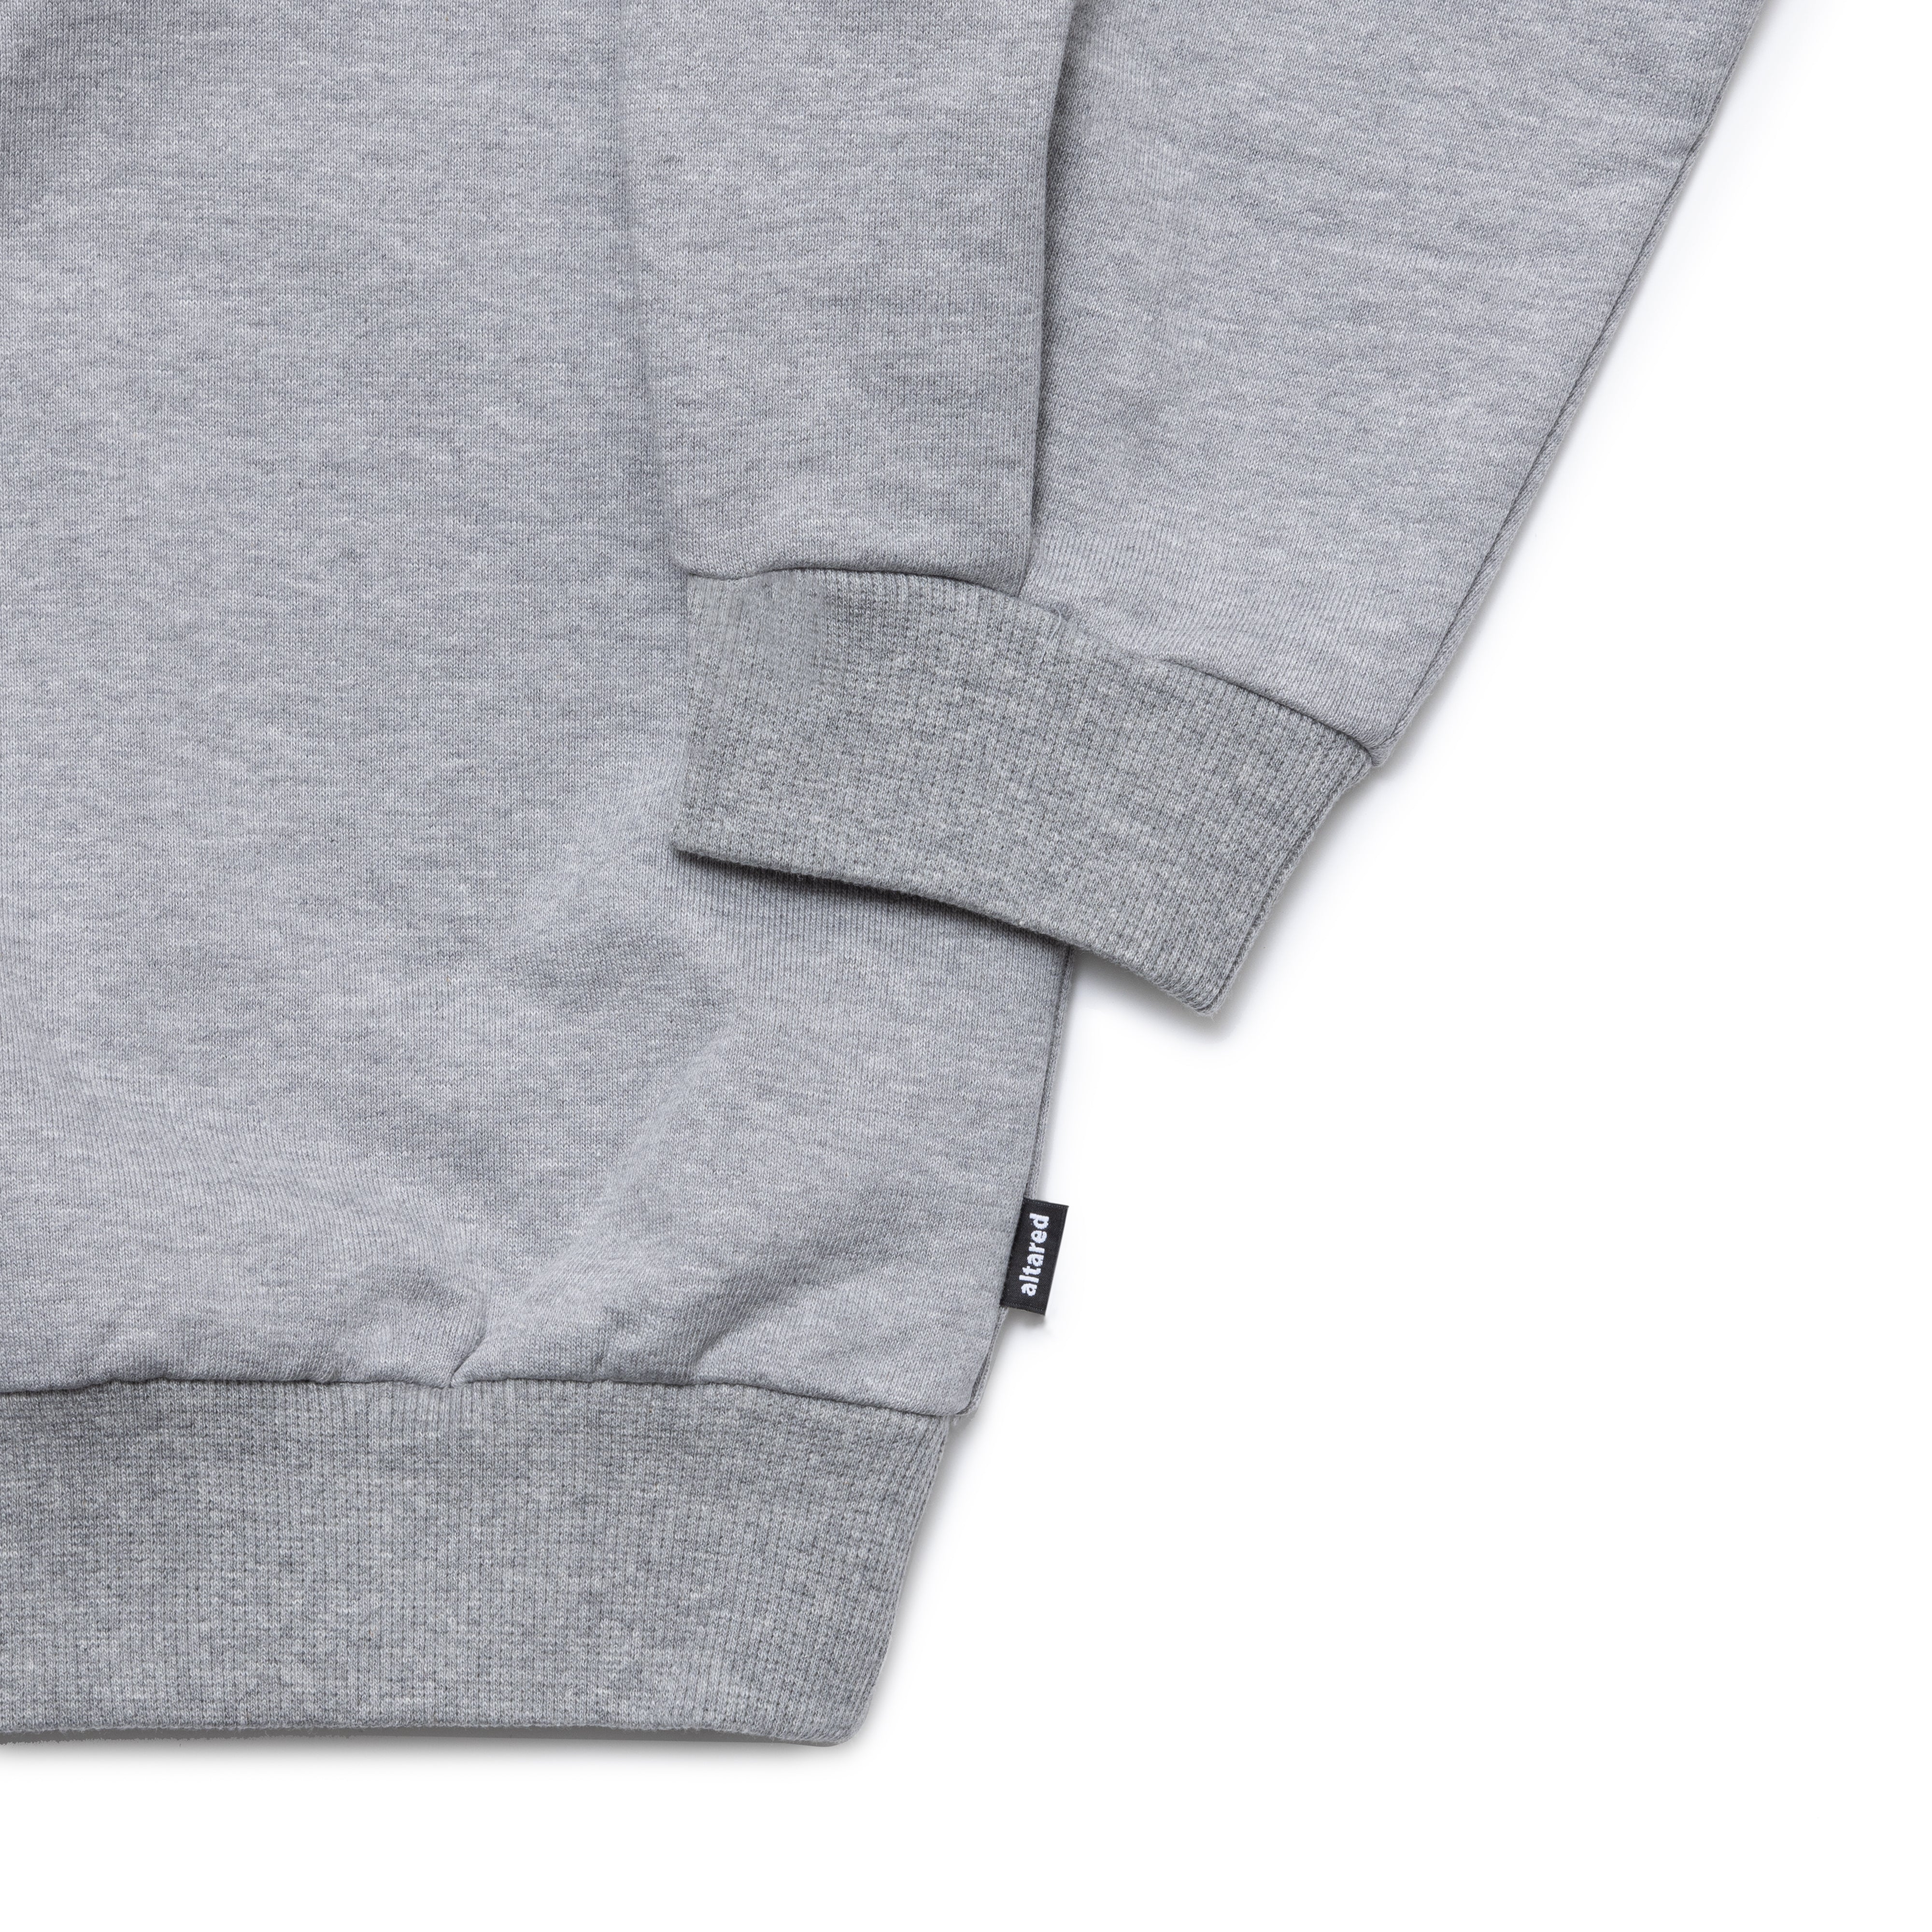 altared/Logo 3D Embroidery Pleated Sleeve Crew Neck Sweat[GRAY]